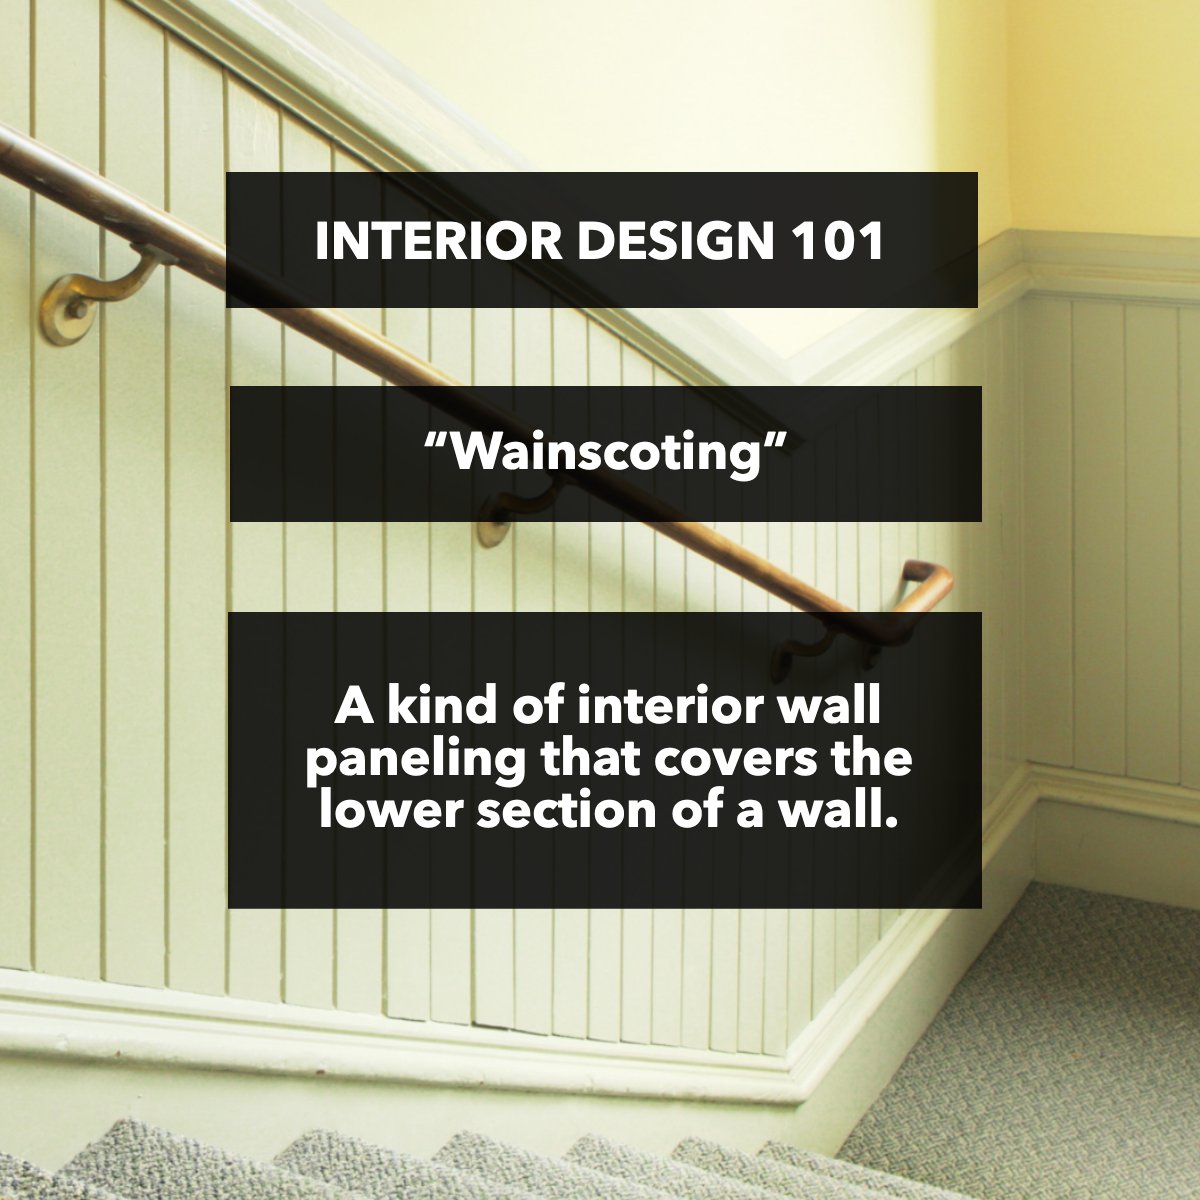 Have you ever heard the term wainscoting? 

✨ The more you know 

#interiorsdesign #interiortrends #interiordesigning #interiordesigntrends #interiorsaddict
 #vanessapruetturierealtor